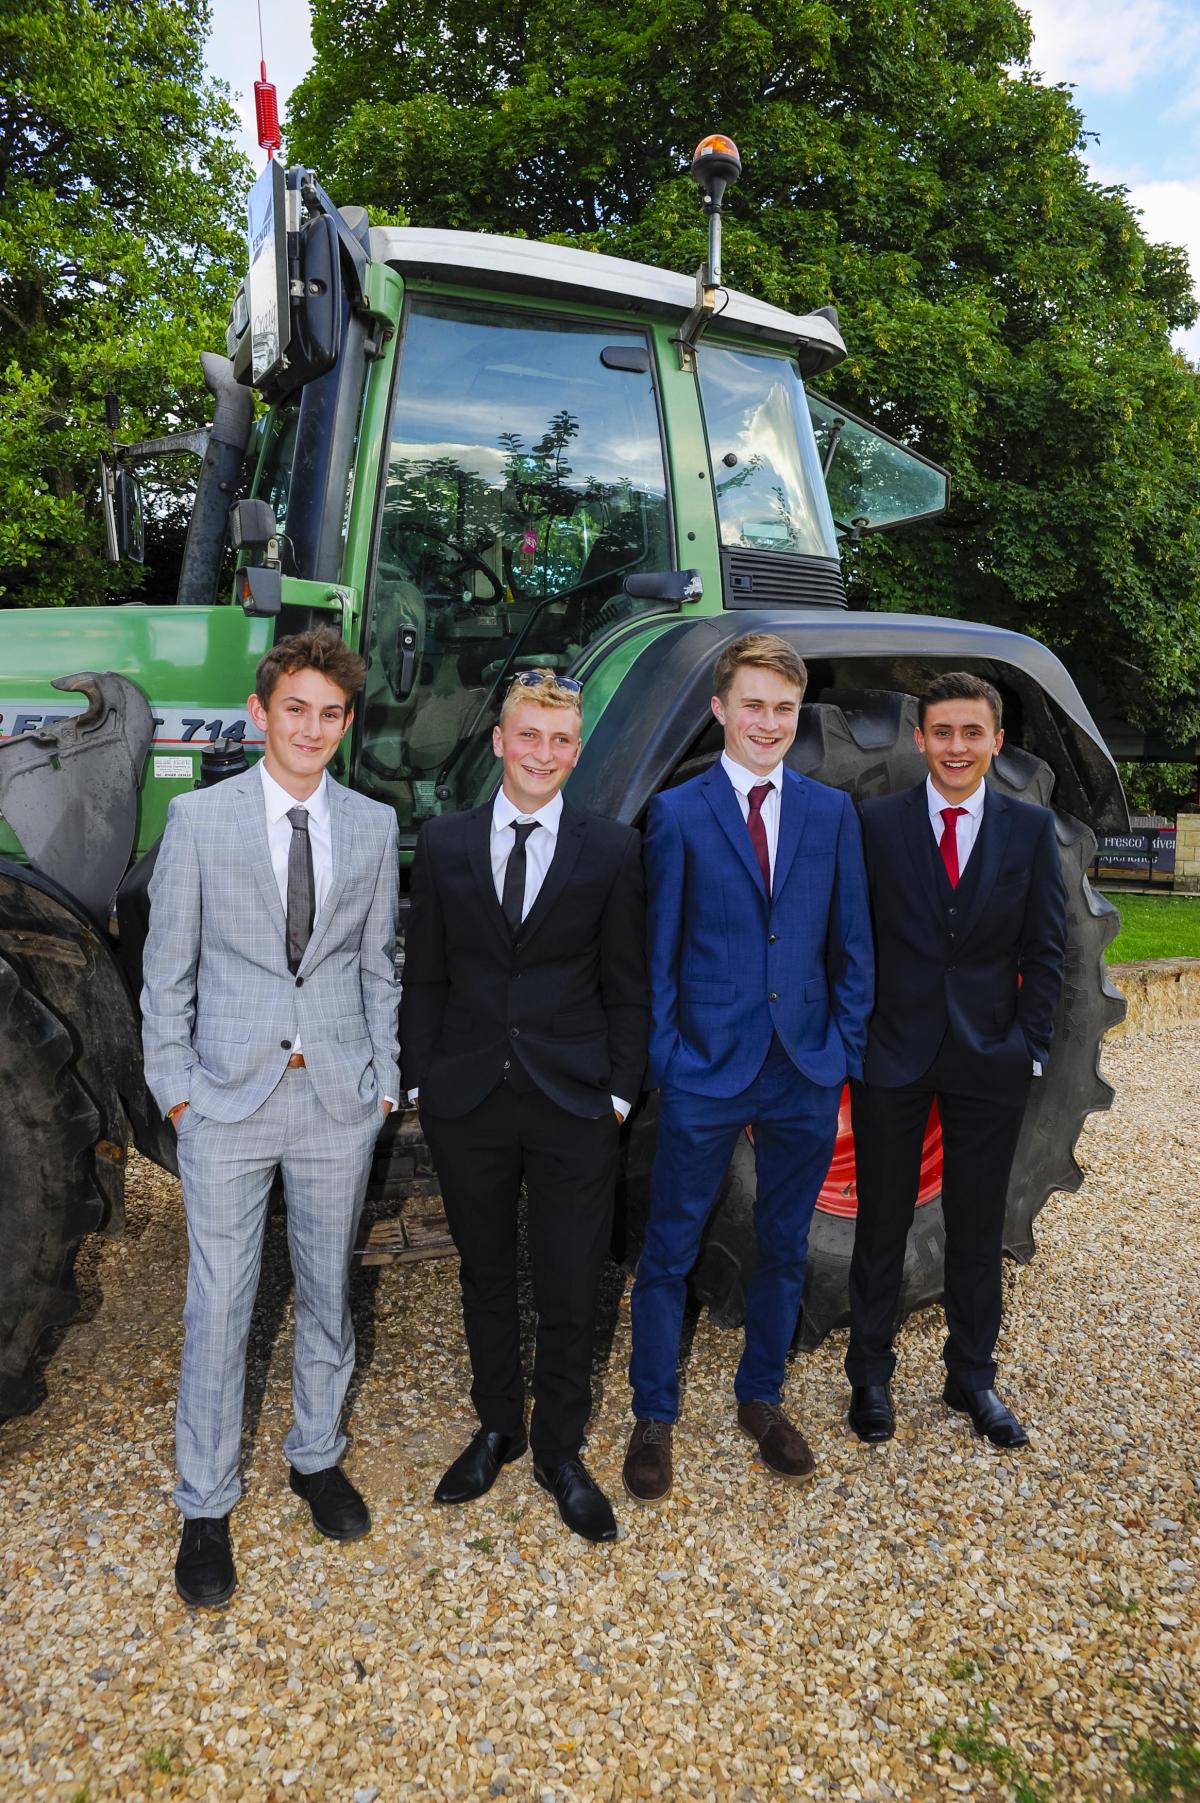 Brett Currall, Matthew Batten, Tom Day and Zach Wilton, Pictures: GRAHAM HUNT PHOTOGRAPHY